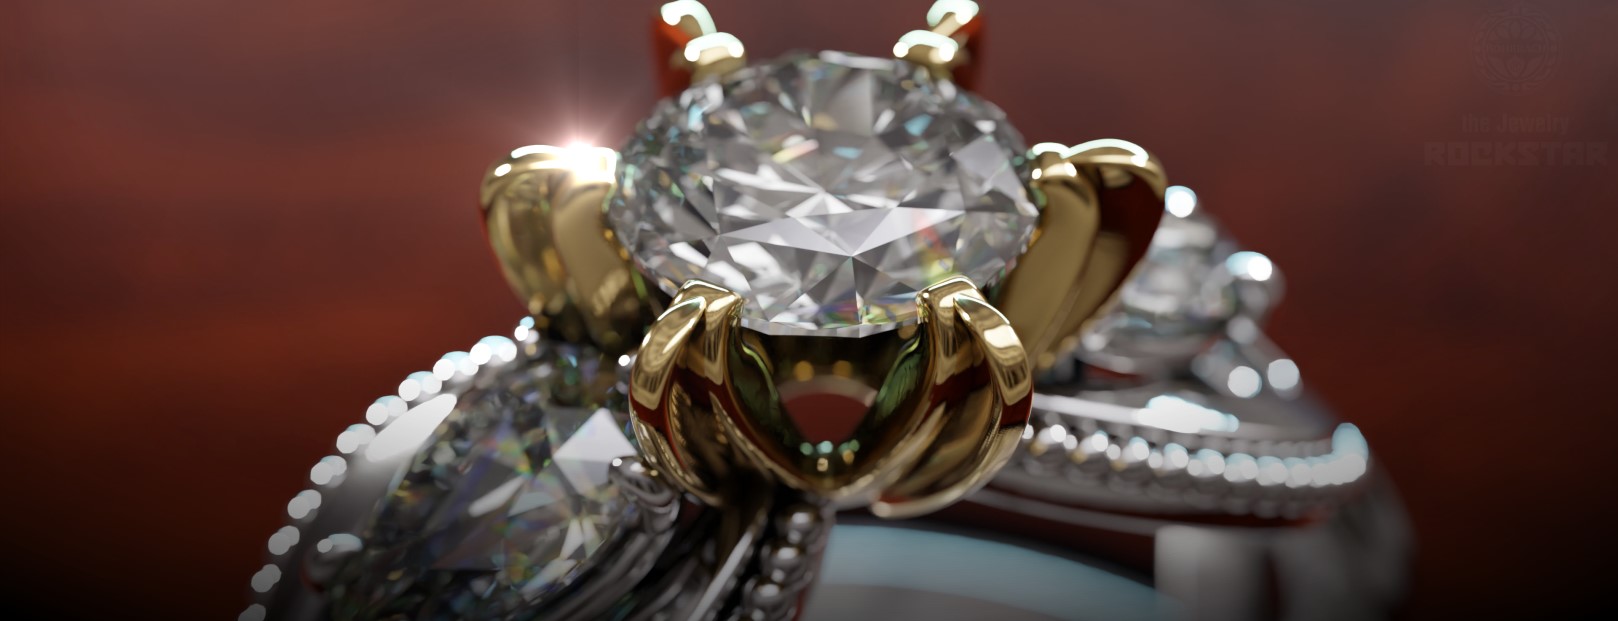 Behind the Scenes: Making 3d Jewelry in Blender - BlenderNation Behind the Scenes: Making 3d Jewelry in Blender - BlenderNation